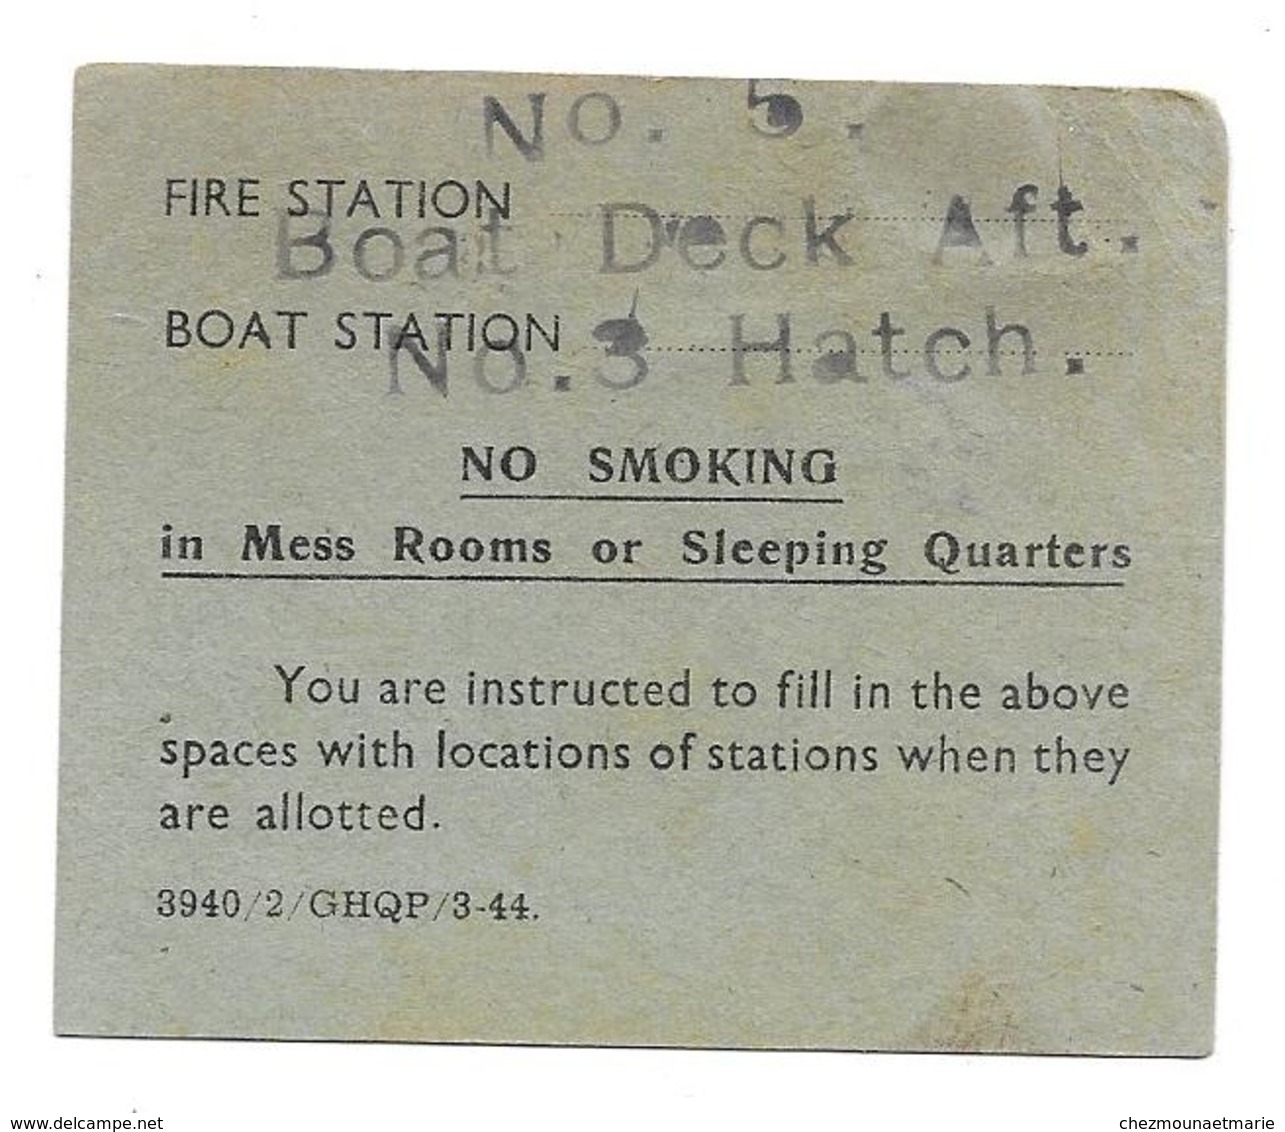 BERTHING CARD - N°5 BOAT DECK AFT N°3 HATCH - FIRE STATION BOAT SATATION - MILITAIRE - Boats